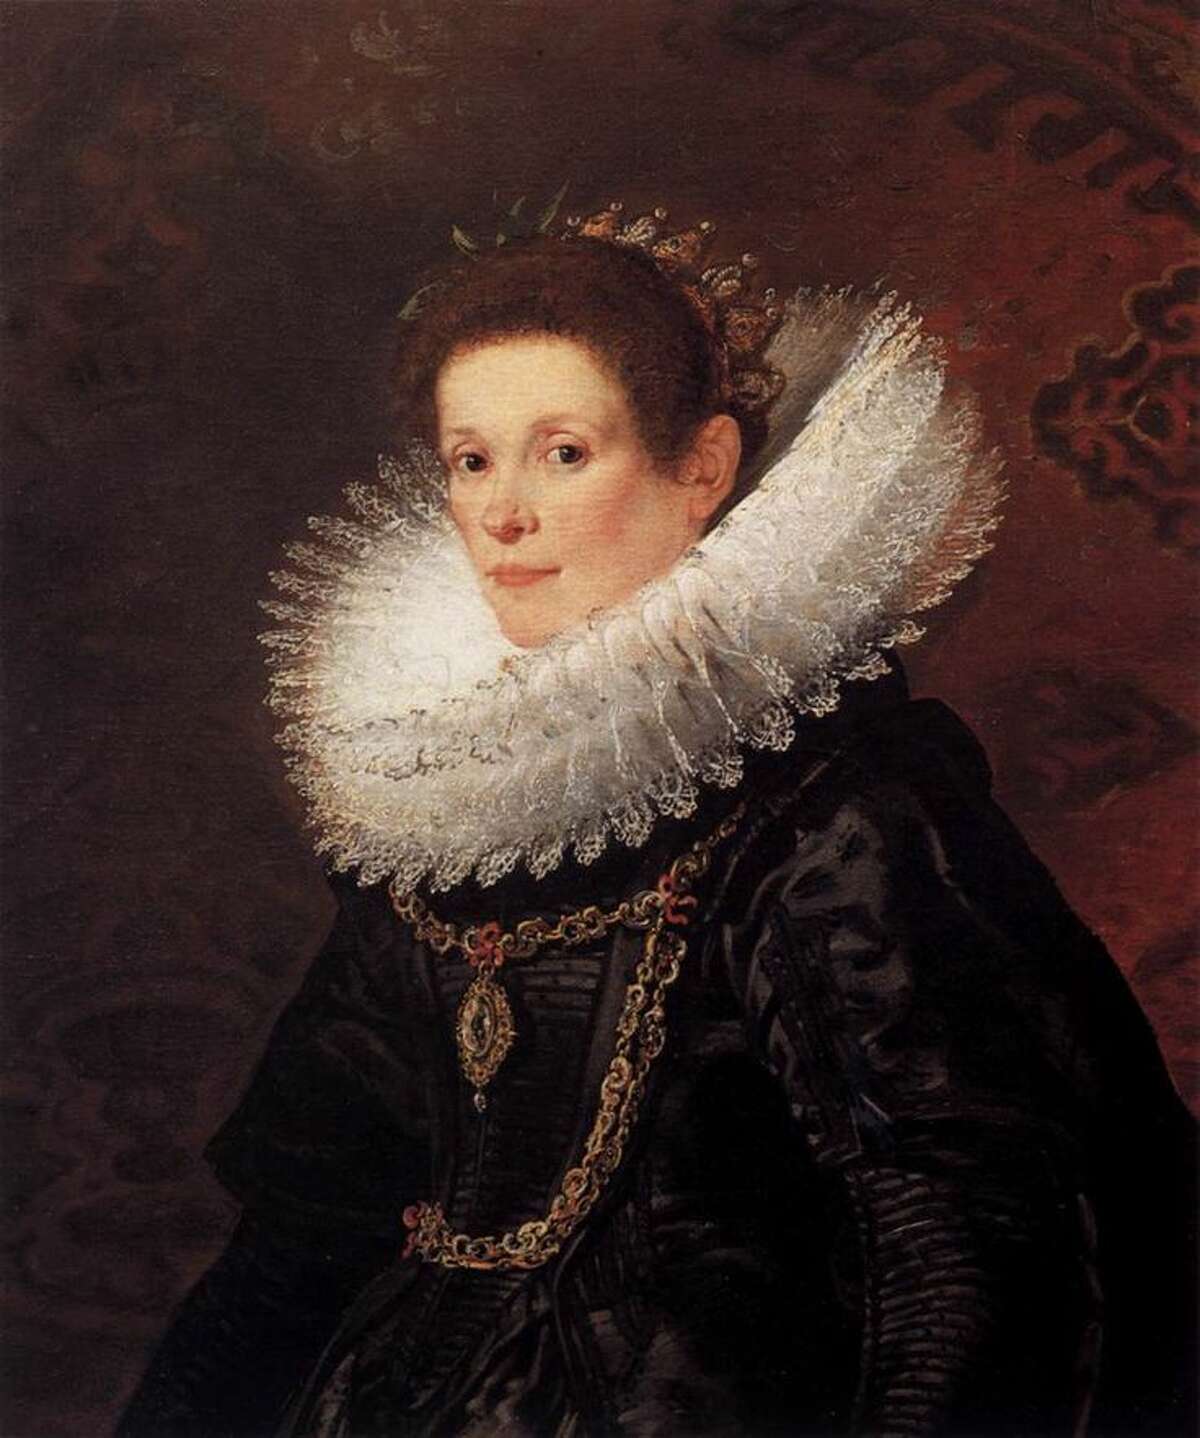 A program on Renaissance fashion & culture will be offered for children on Saturday, April 16, at the Bellarmine Museum in Fairfield. The painting above shows an example of an ornate collar ruff.